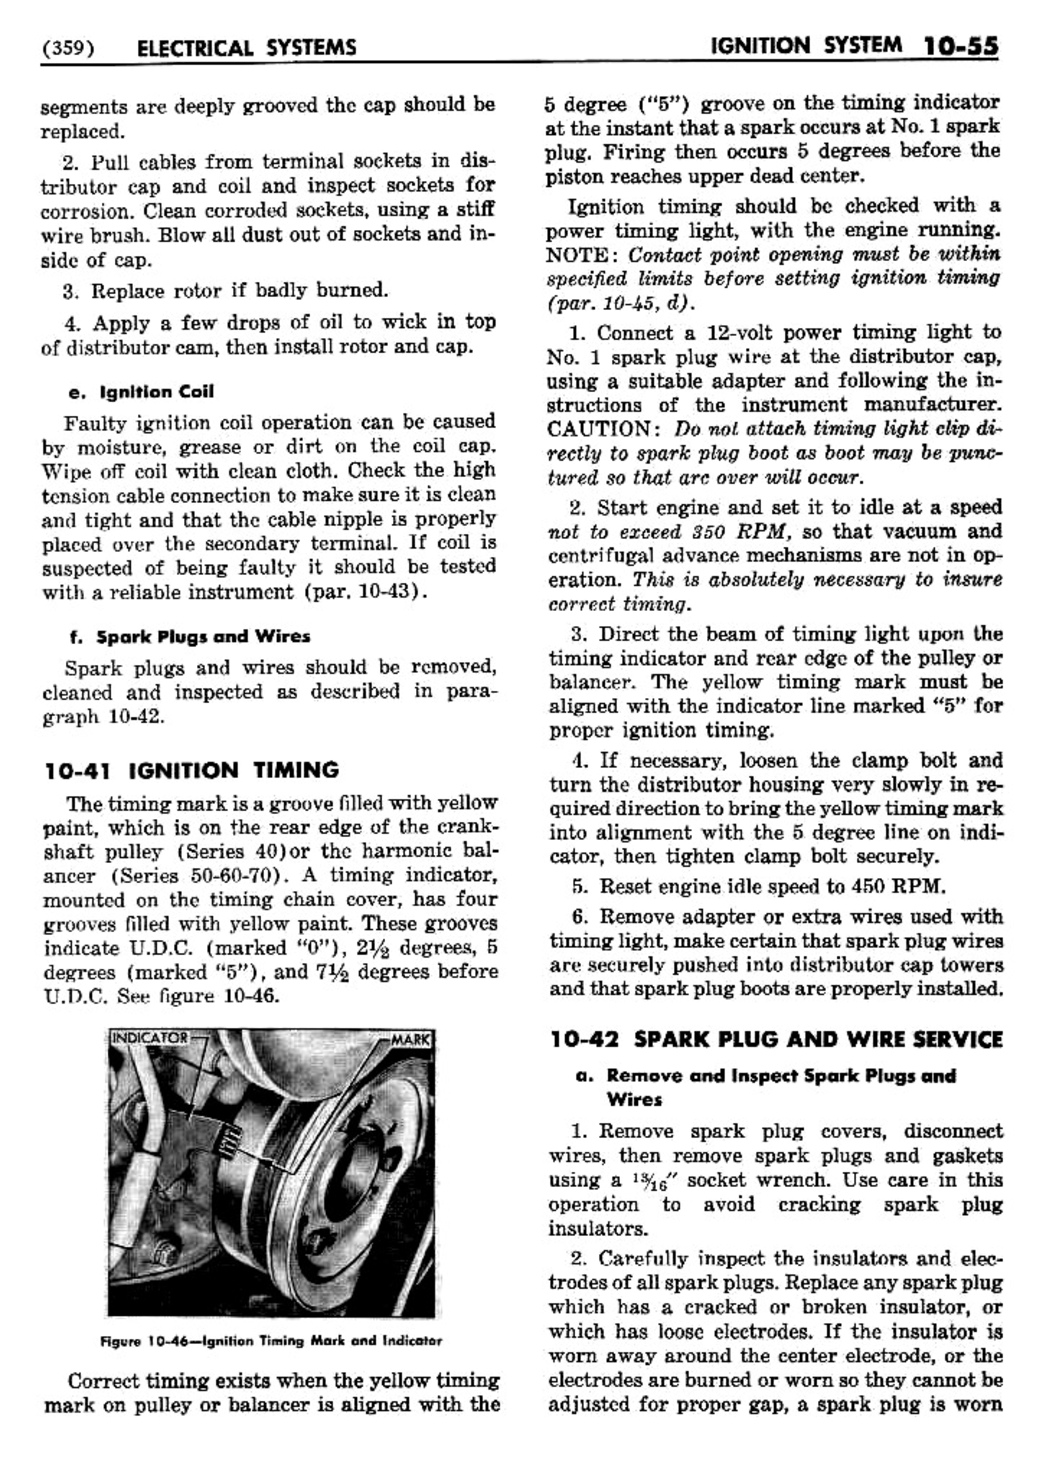 n_11 1955 Buick Shop Manual - Electrical Systems-055-055.jpg